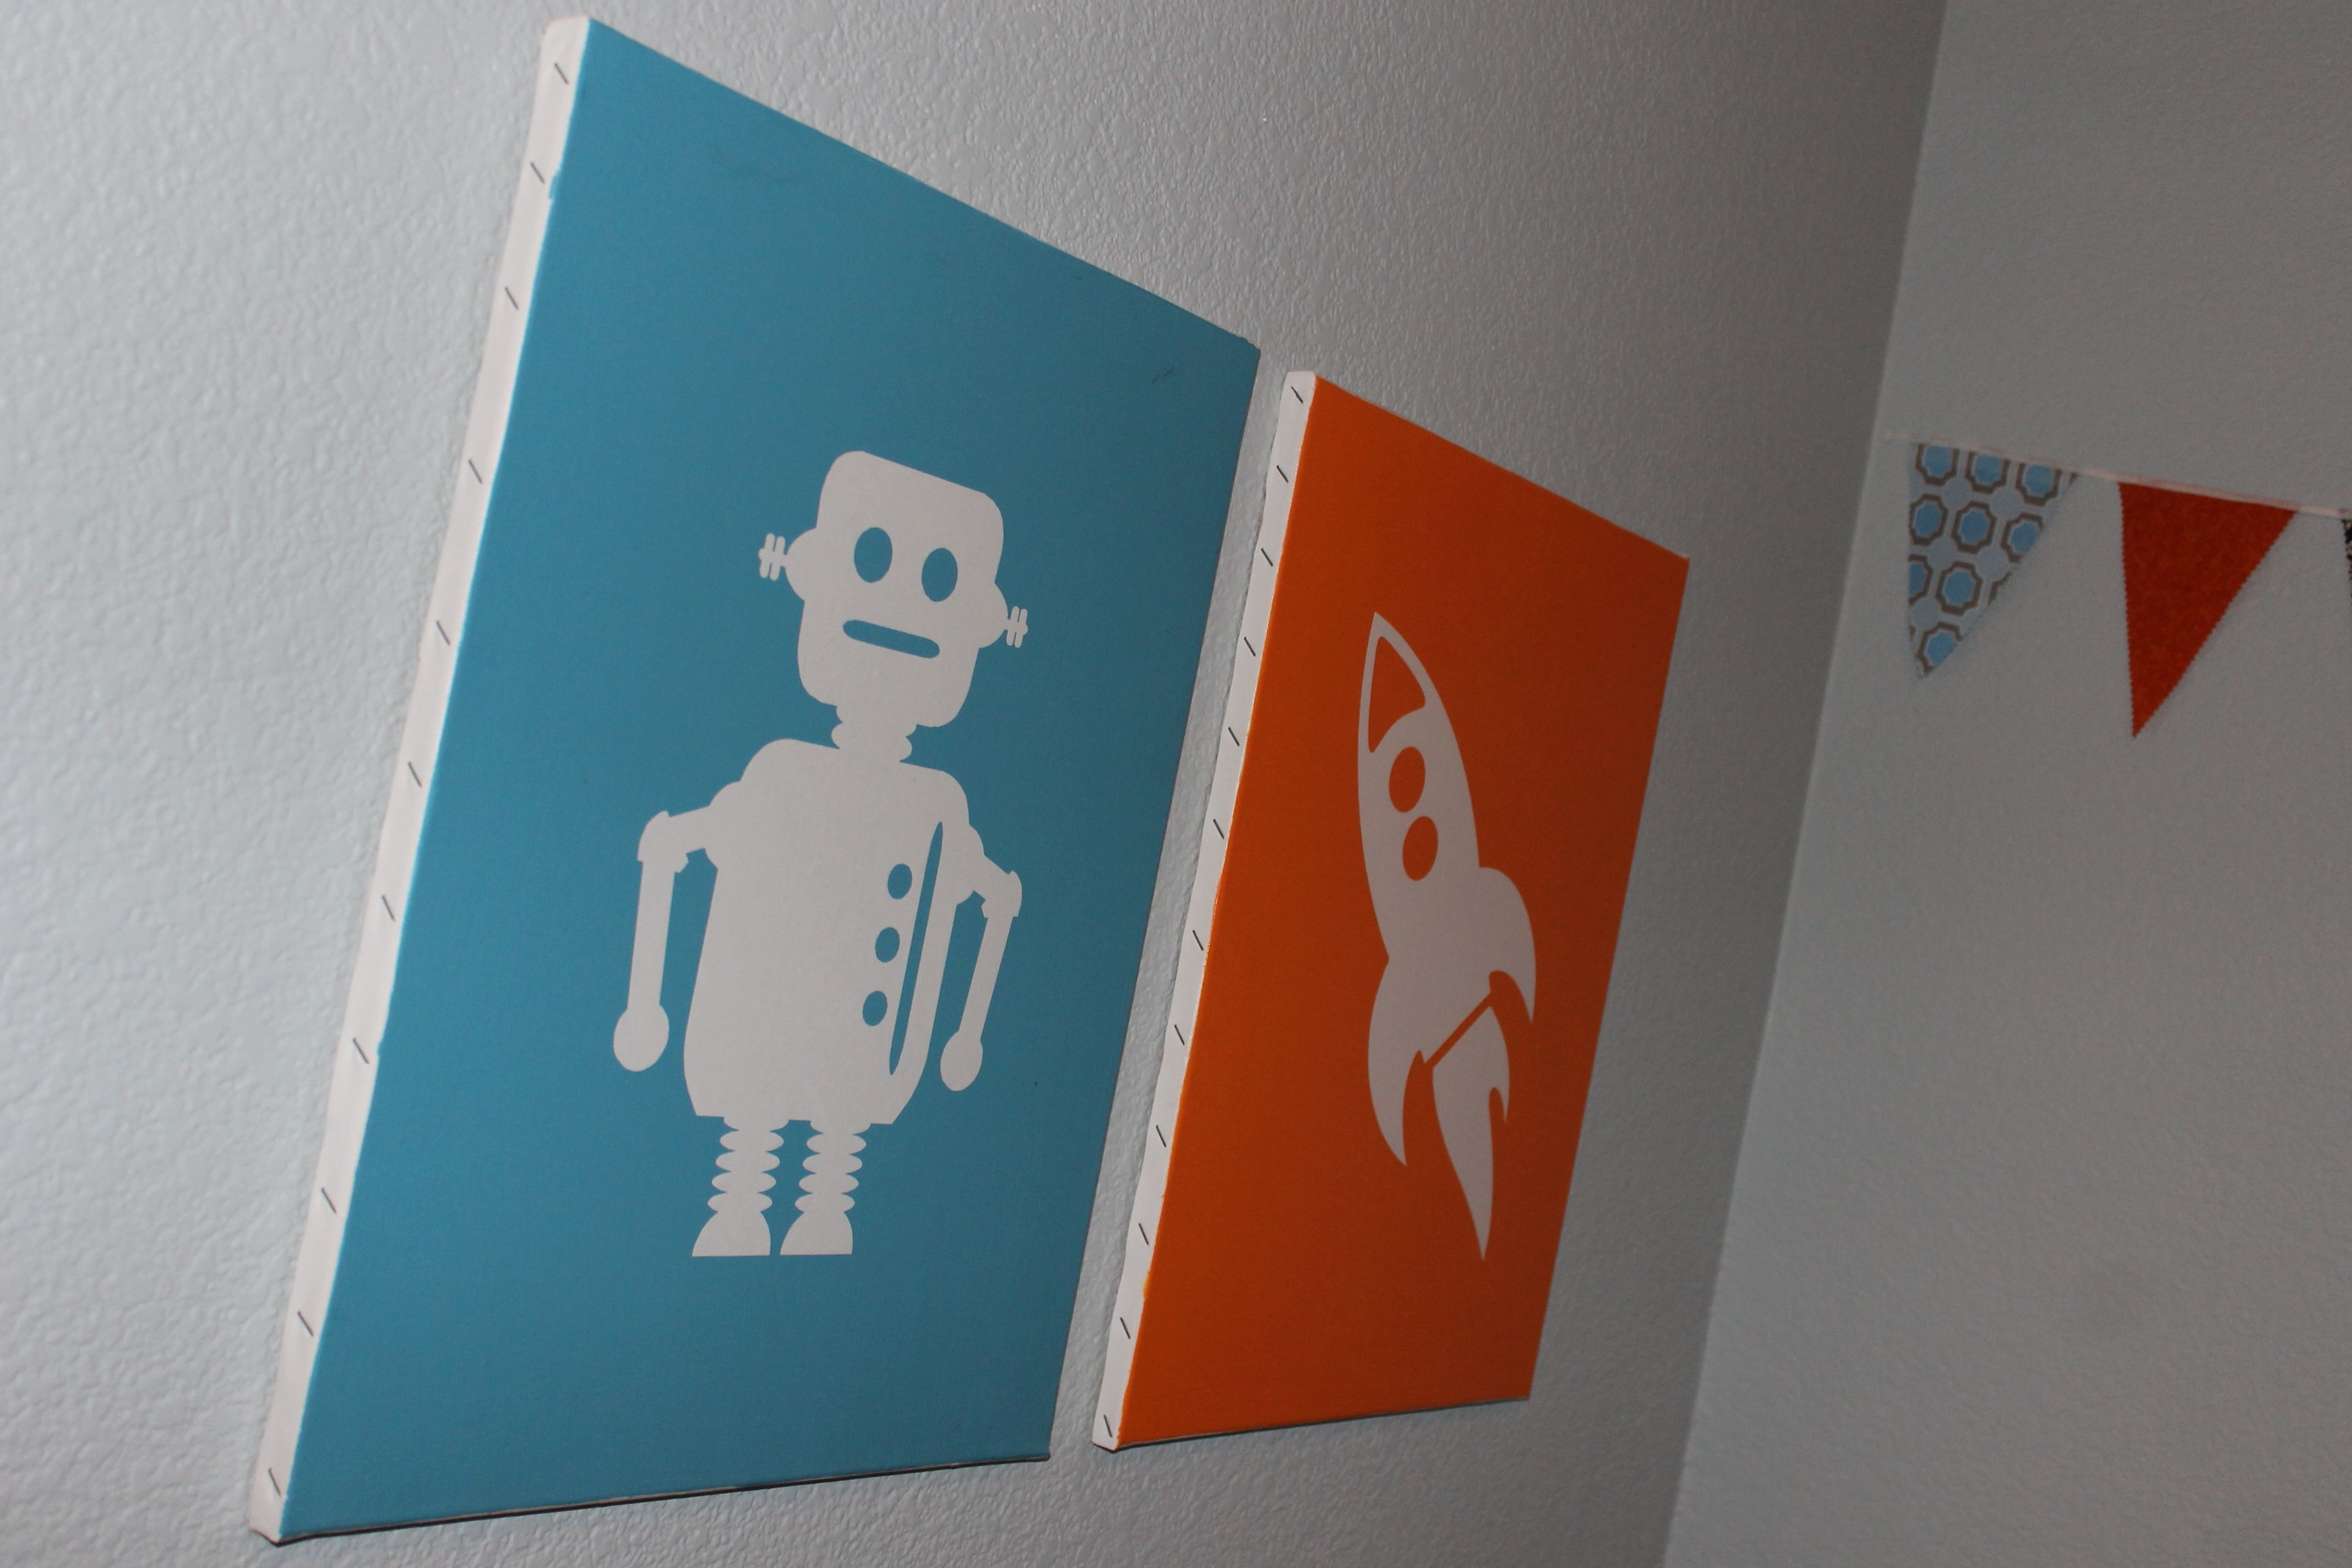 Well Liked Simply Made Sunday: Ombre Canvas Art Regarding Robot Canvas Wall Art (View 3 of 15)